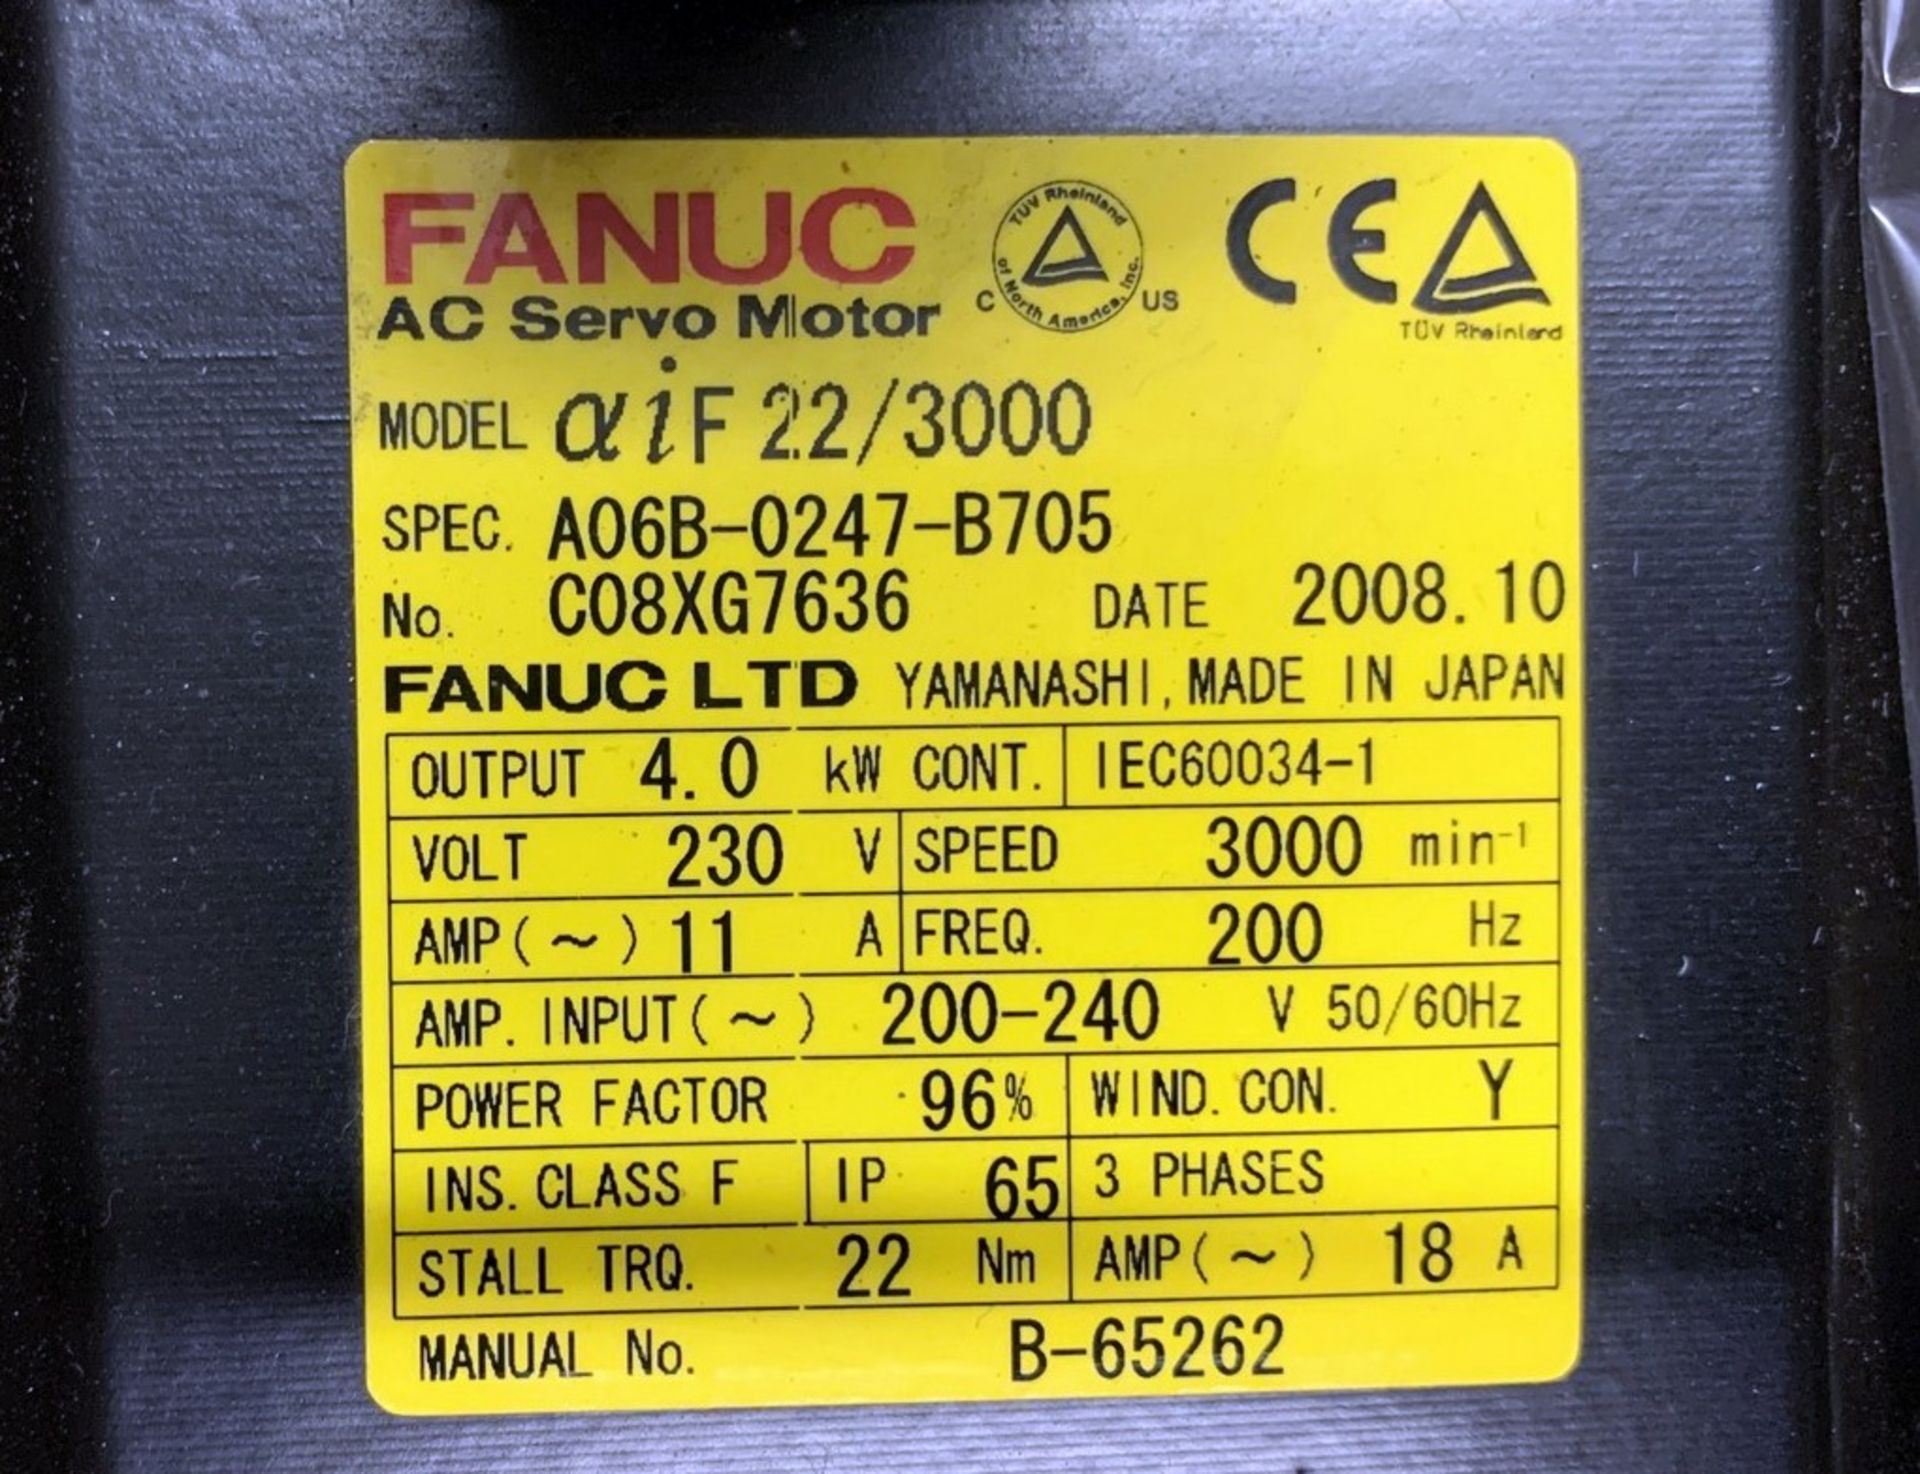 Fanuc Mdl. aif22/3000 AC Servo Motor in Box (All Items MUST be Removed by Thursday, December 19, - Image 3 of 3